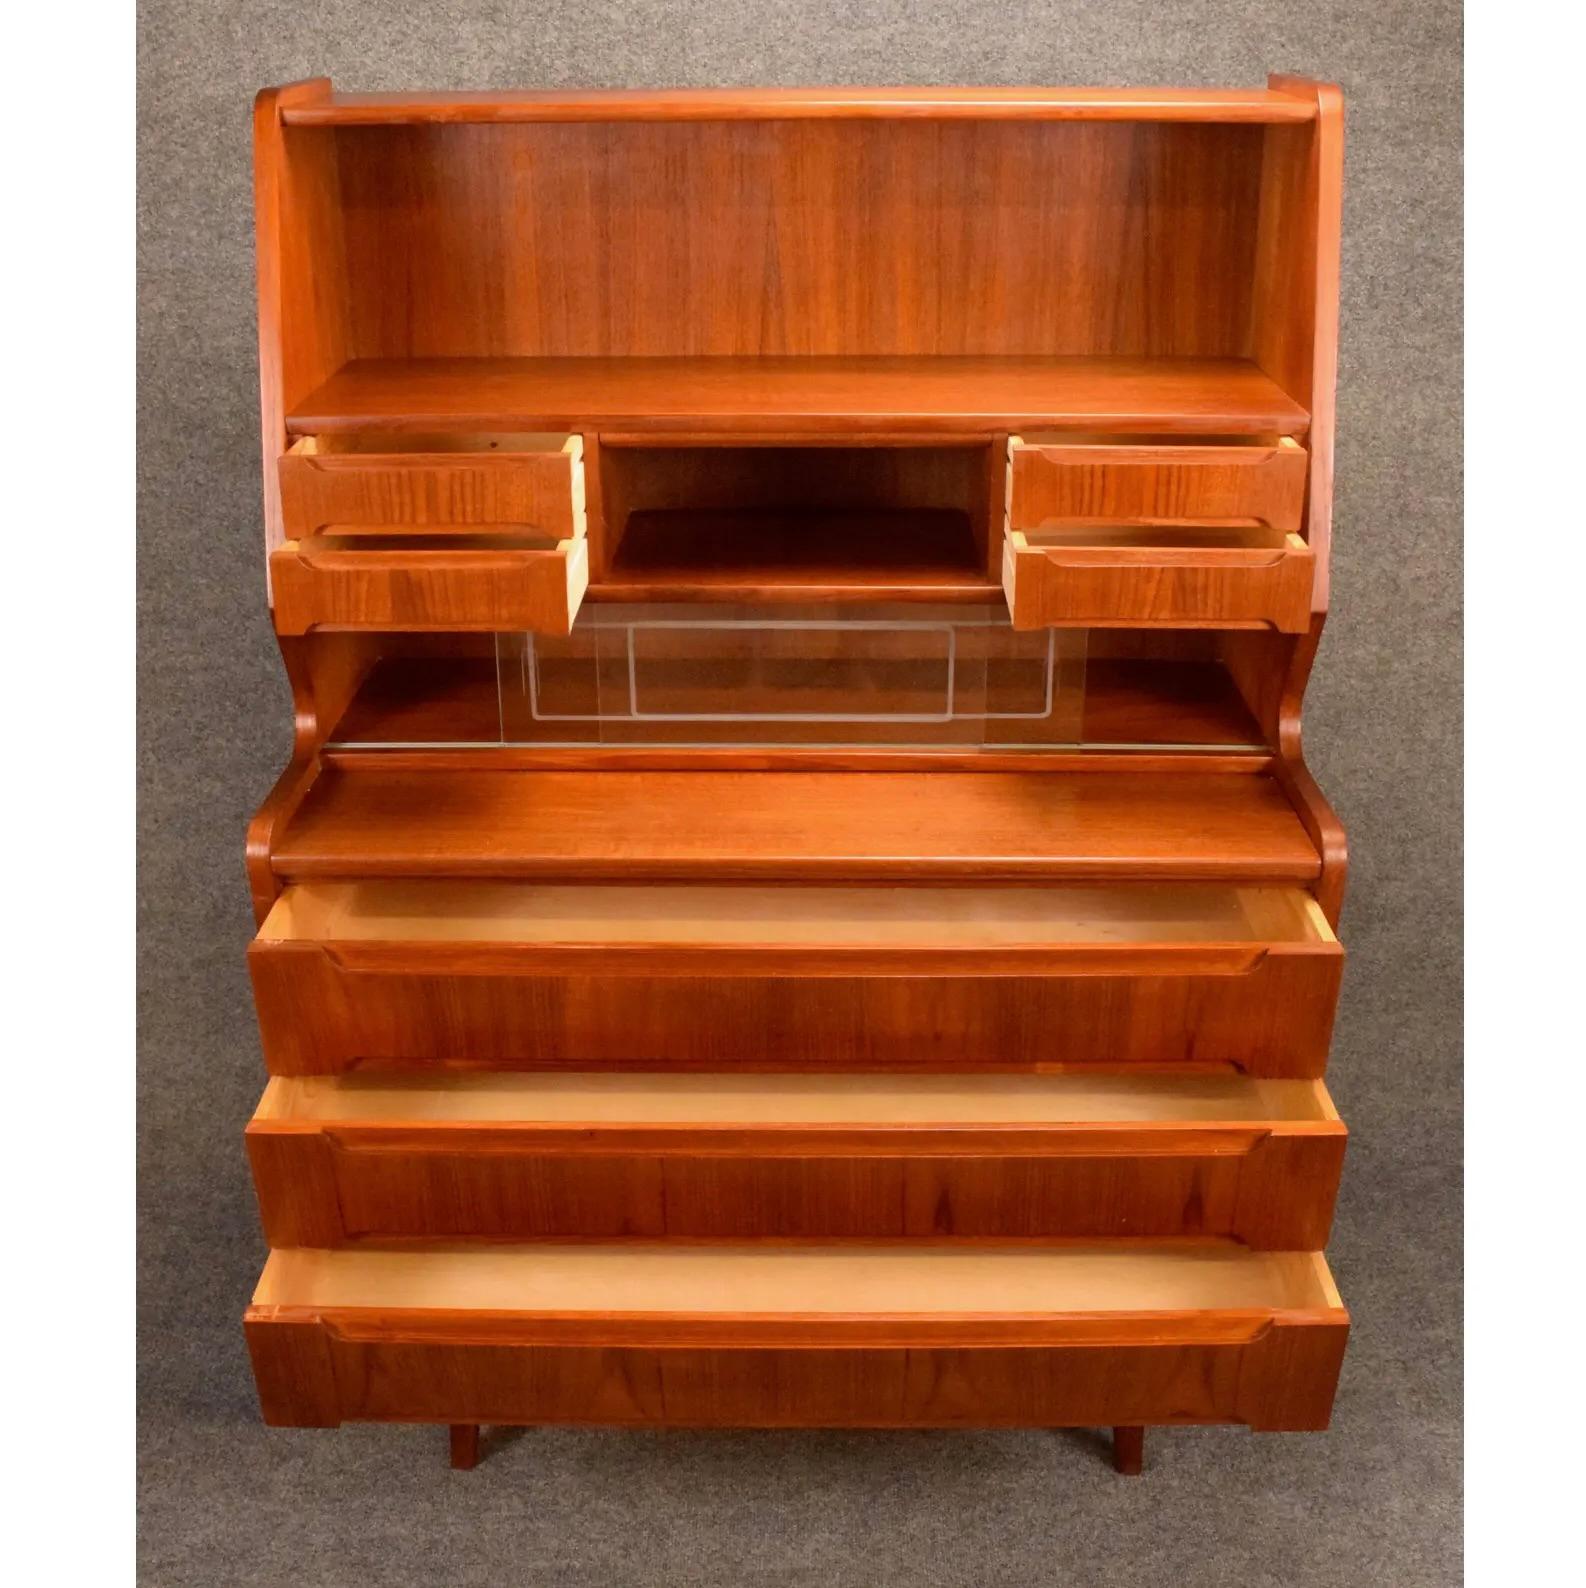 Here is a beautiful scandinavian modern teak secretary desk manufactured in Denmark inn the 1960's that was recently imported from Europe to California before its restoration. 
This exquisite storage piece features vibrant wood grains details + a